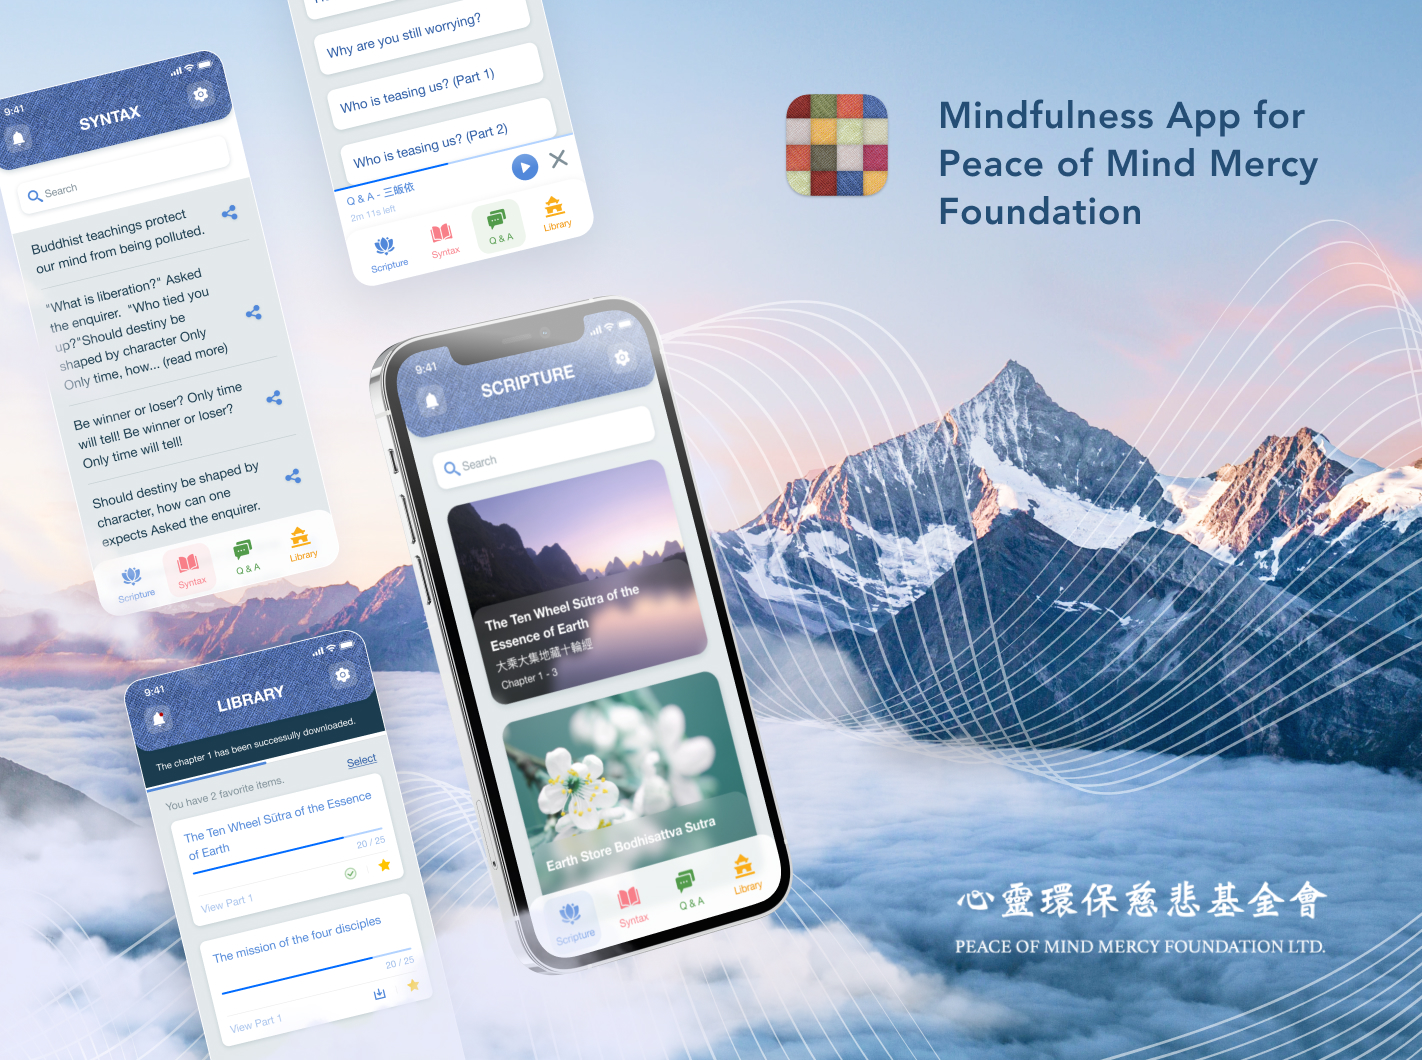 Mindfulness App for Peace of Mind Mercy Foundation